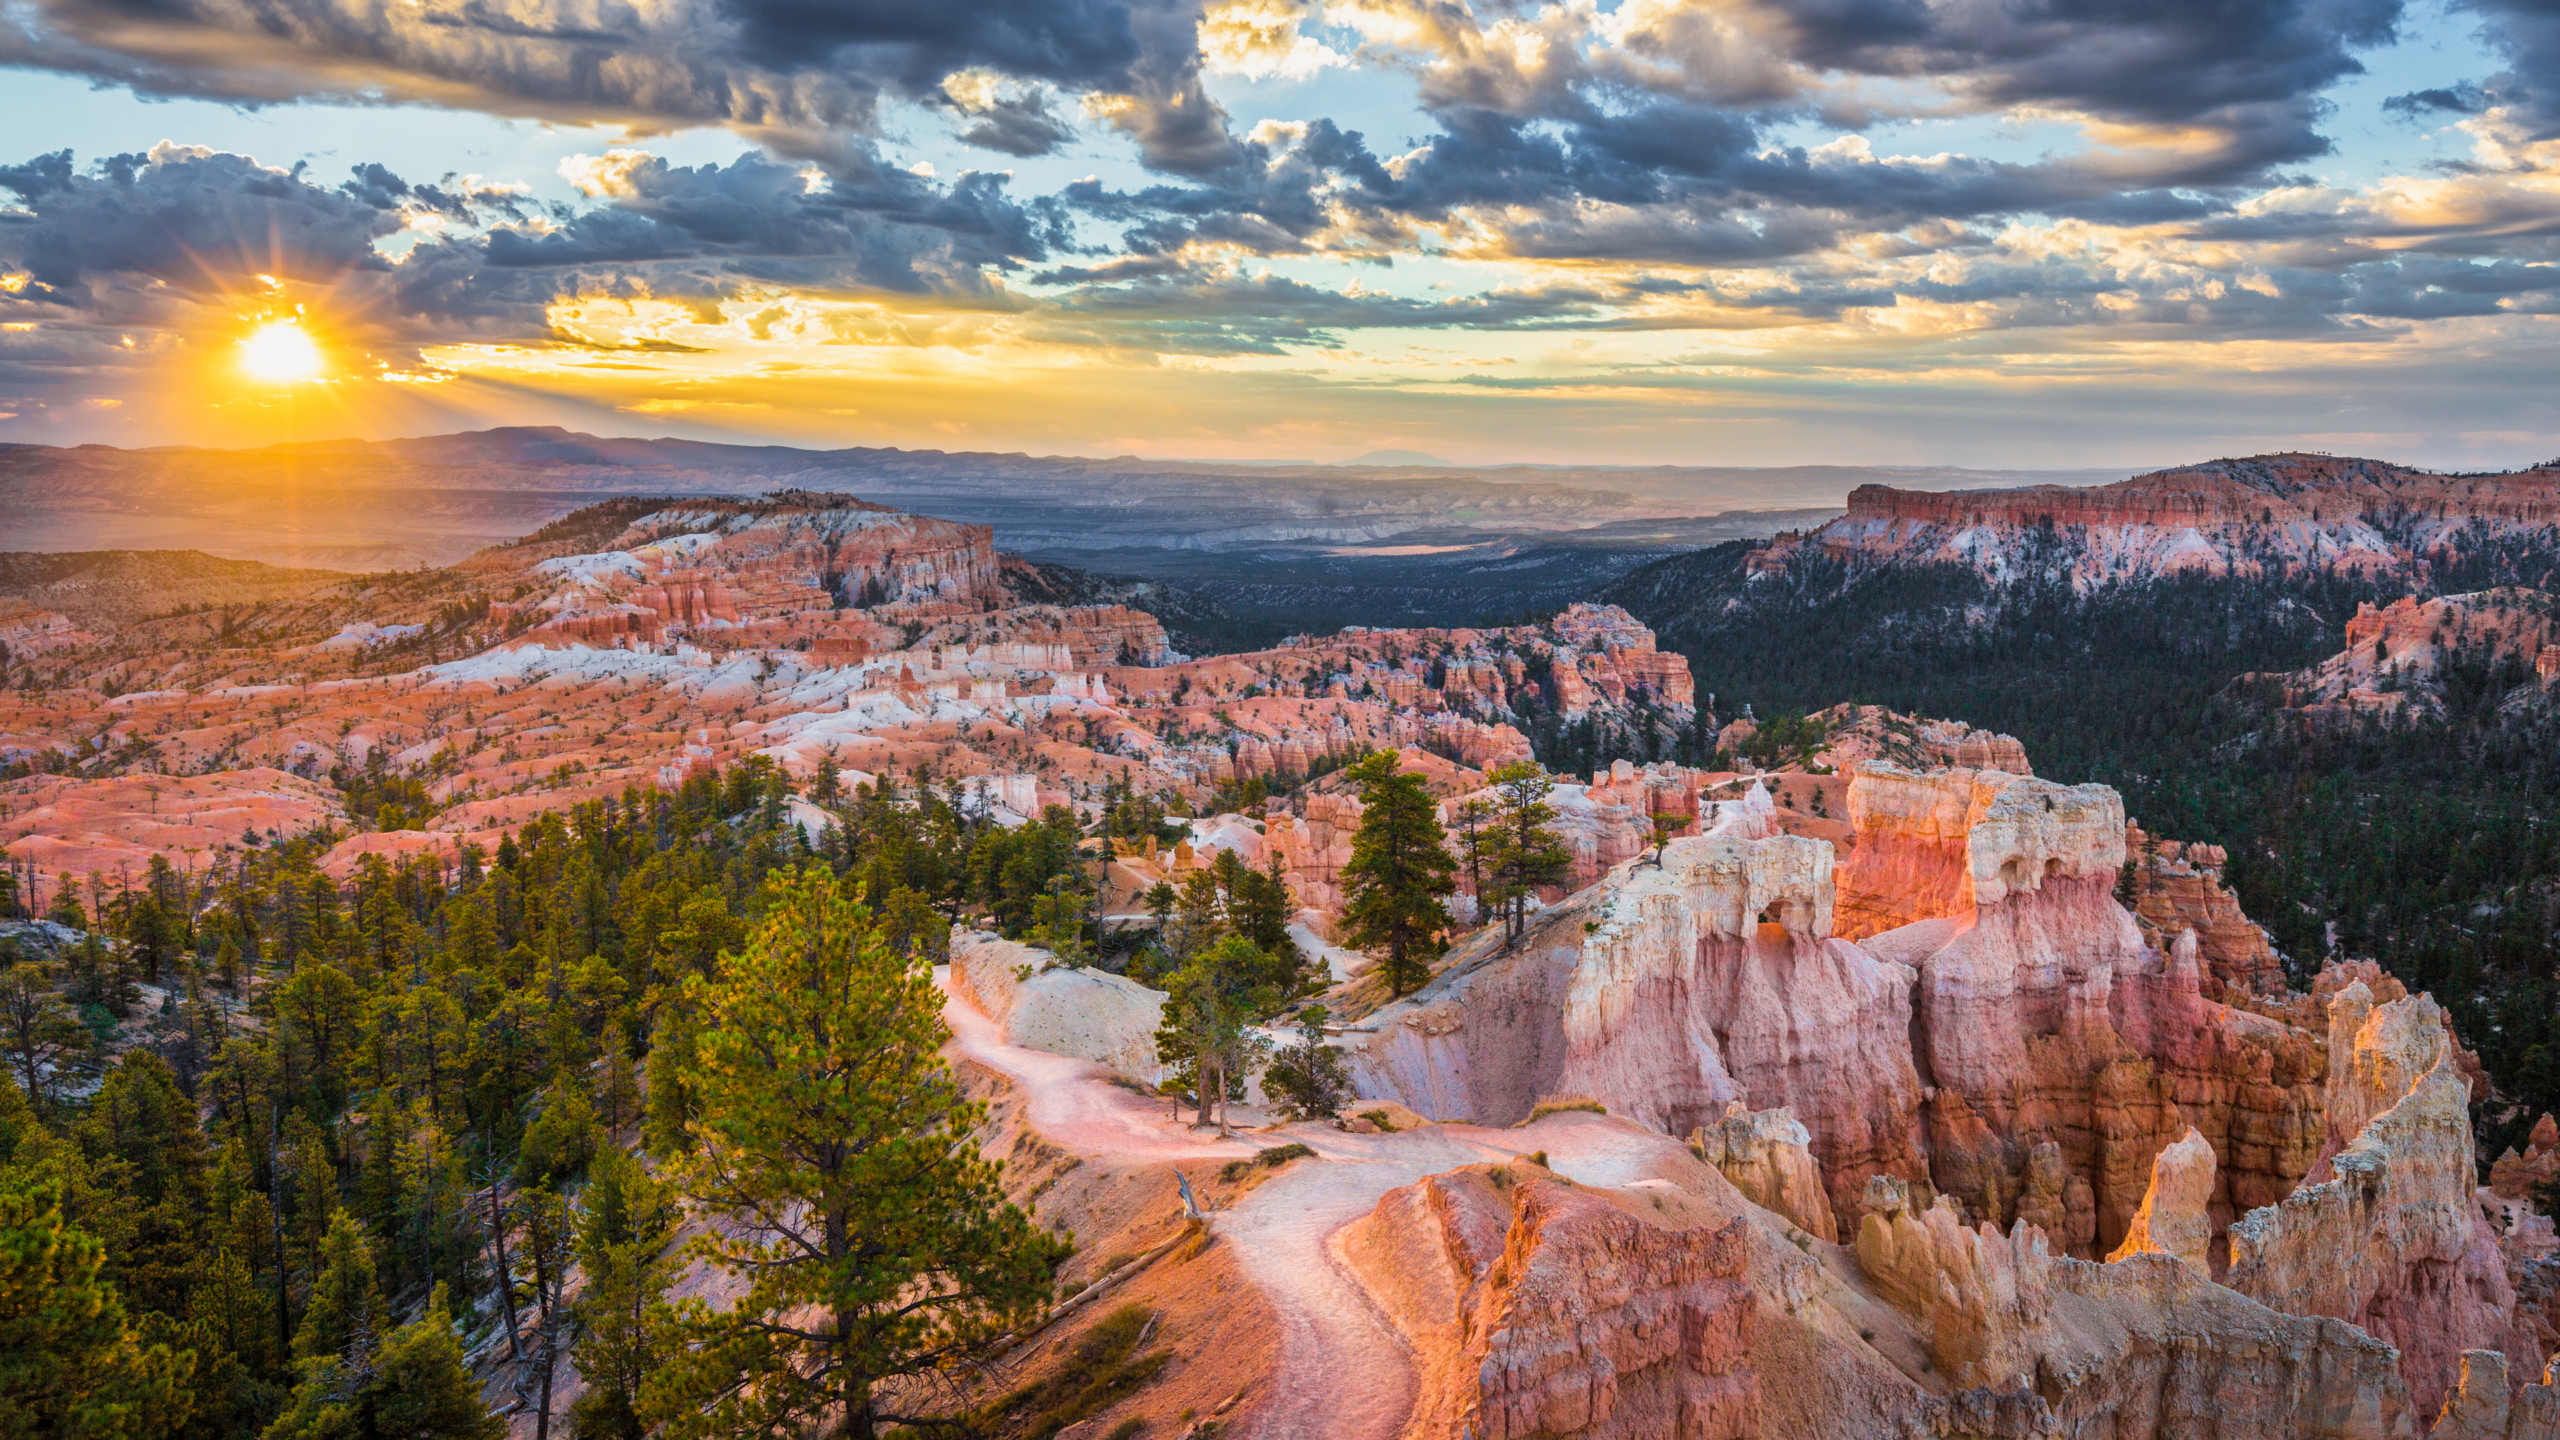 hoodoos and hillsides of bryce canyon national park at sunset. the hills are orange and the sky is golden and blue